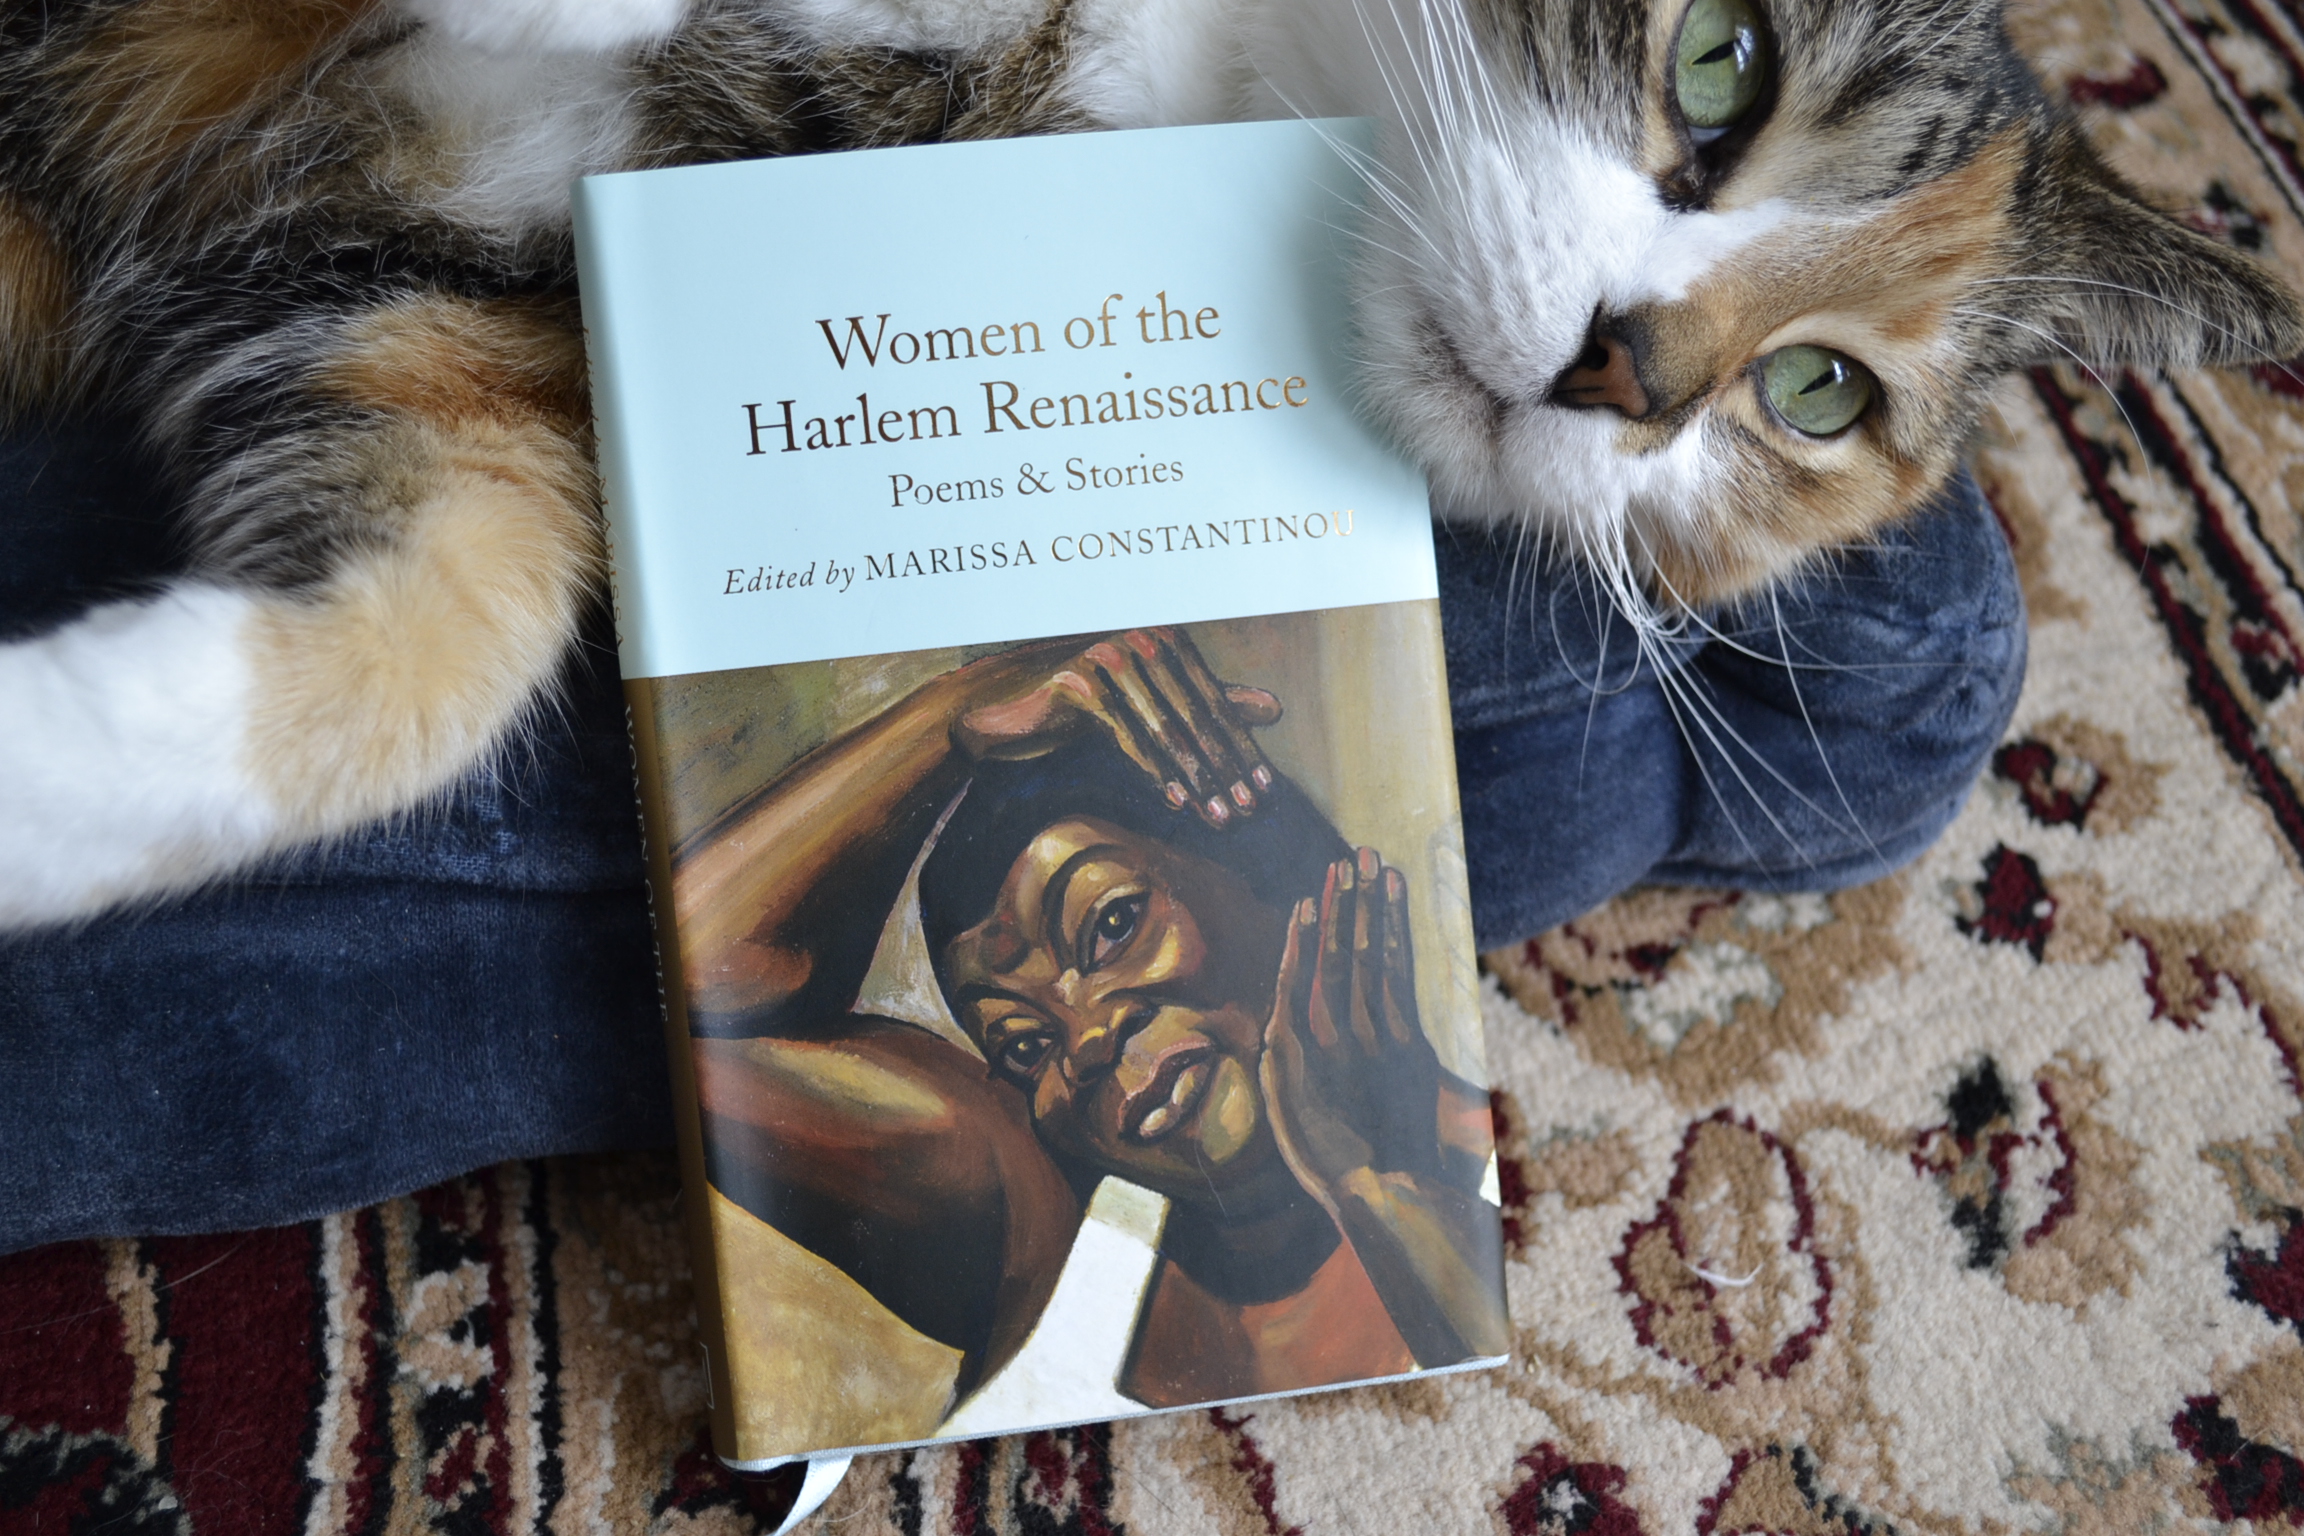 A little blue book titled Women of the Harlem Renaissance features a painting of a Black woman smoothing her hair on the cover.